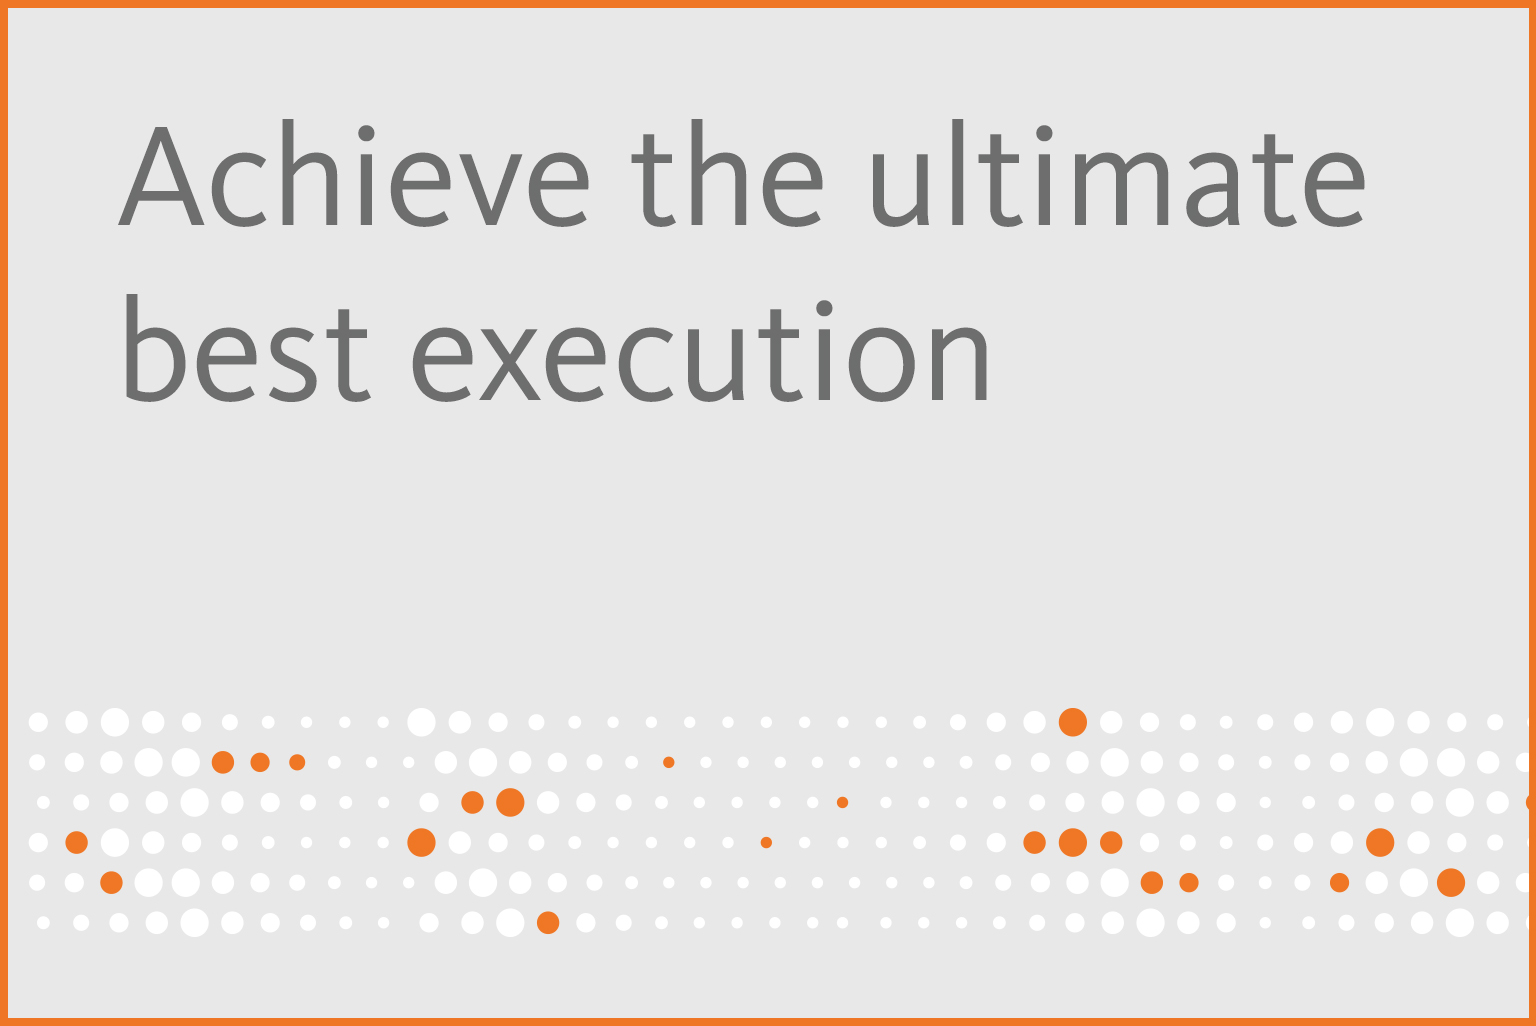 Achieve the ultimate best execution